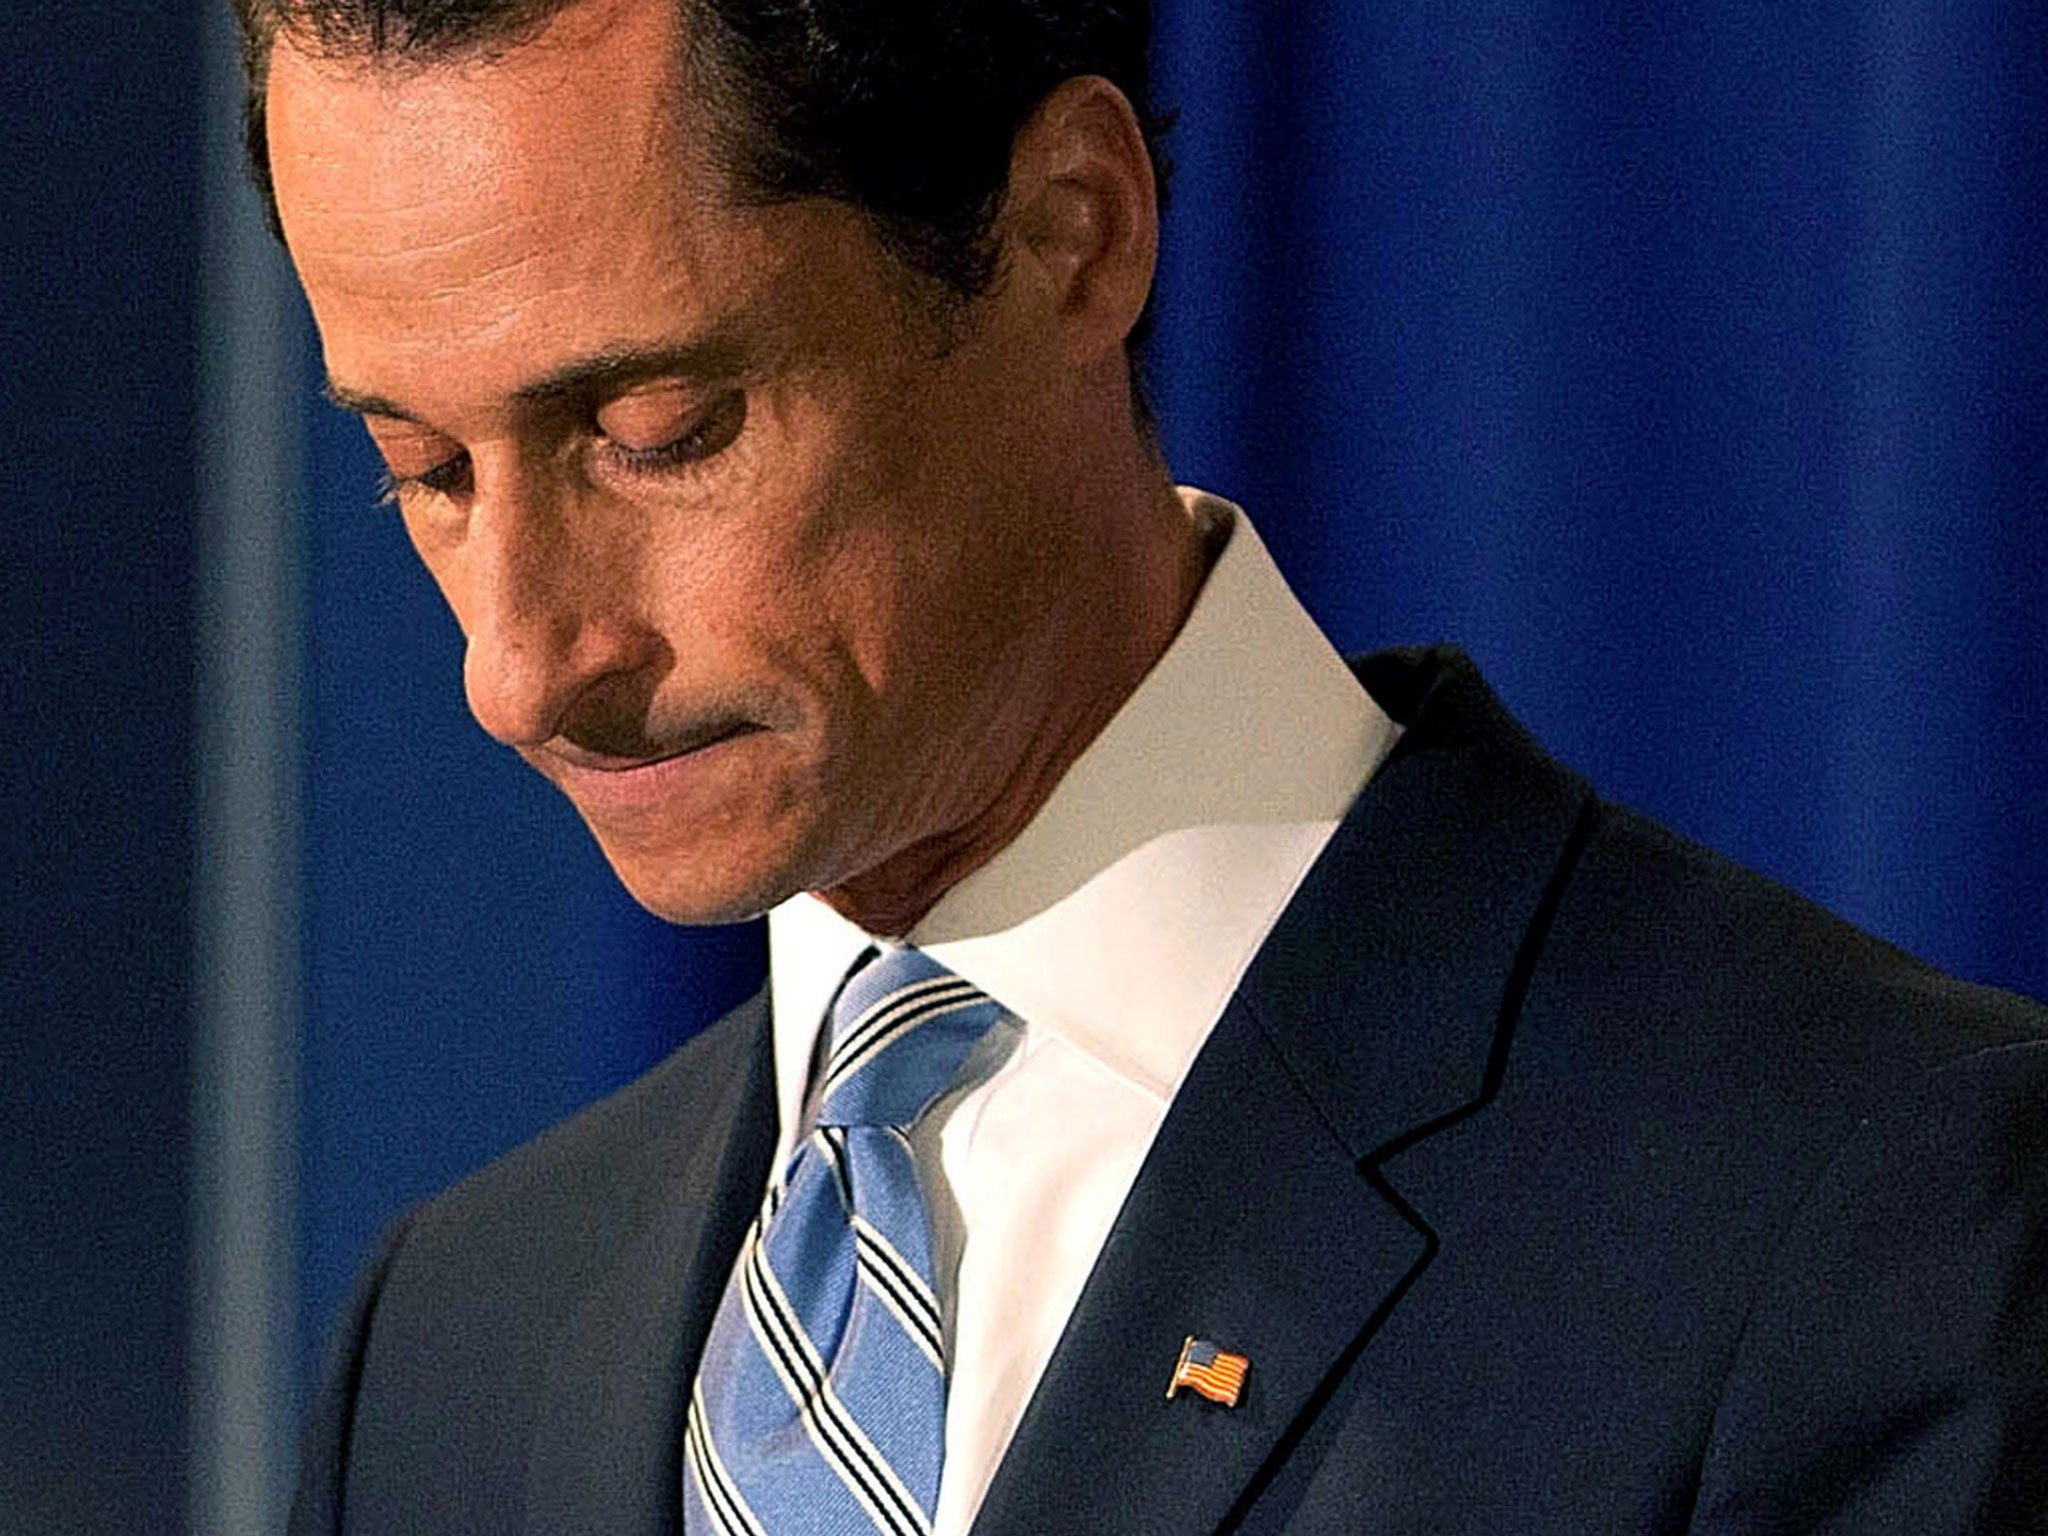 Anthony Weiner was hit by a series of sexting scandals